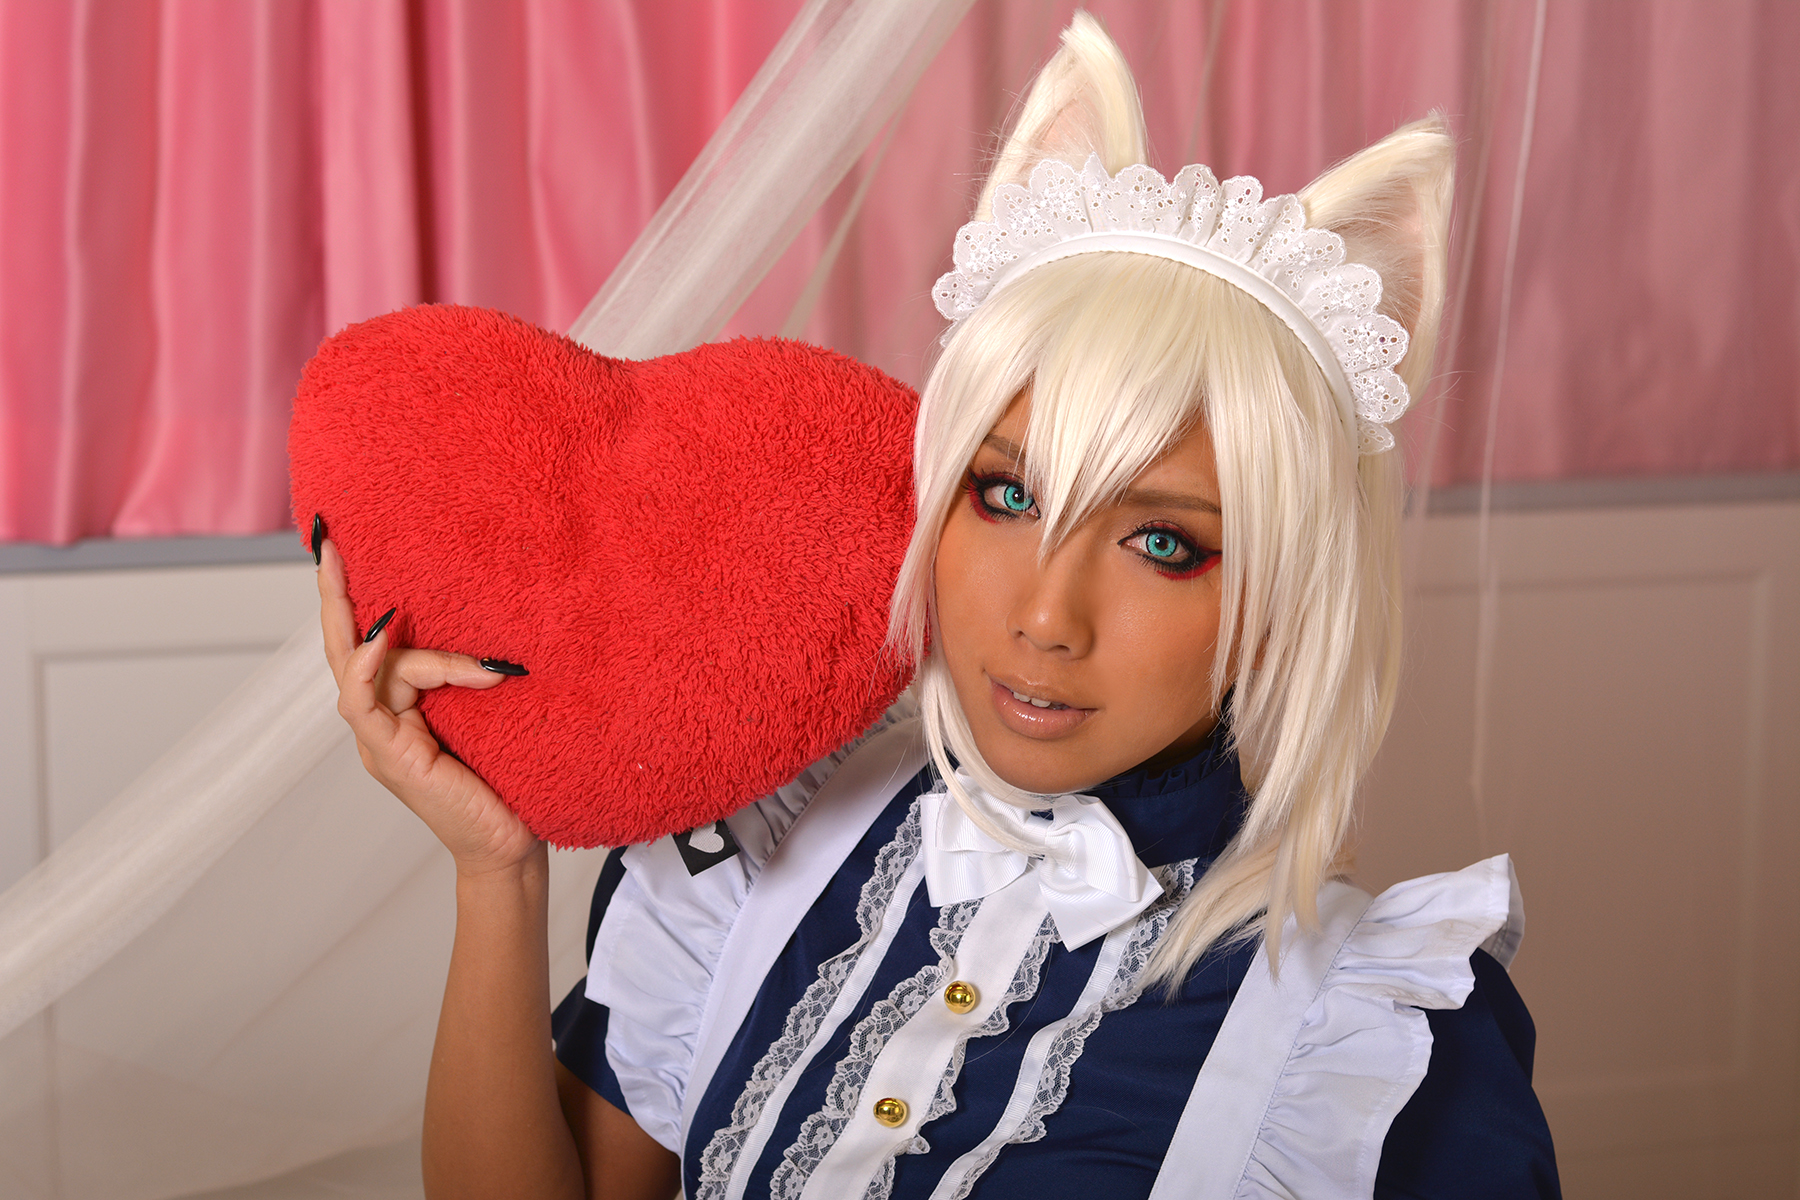 People 1800x1200 Japanese women Japanese women Asian gravure NonSummerJack women indoors cosplay heart cat girl animal ears painted nails makeup maid outfit tanned